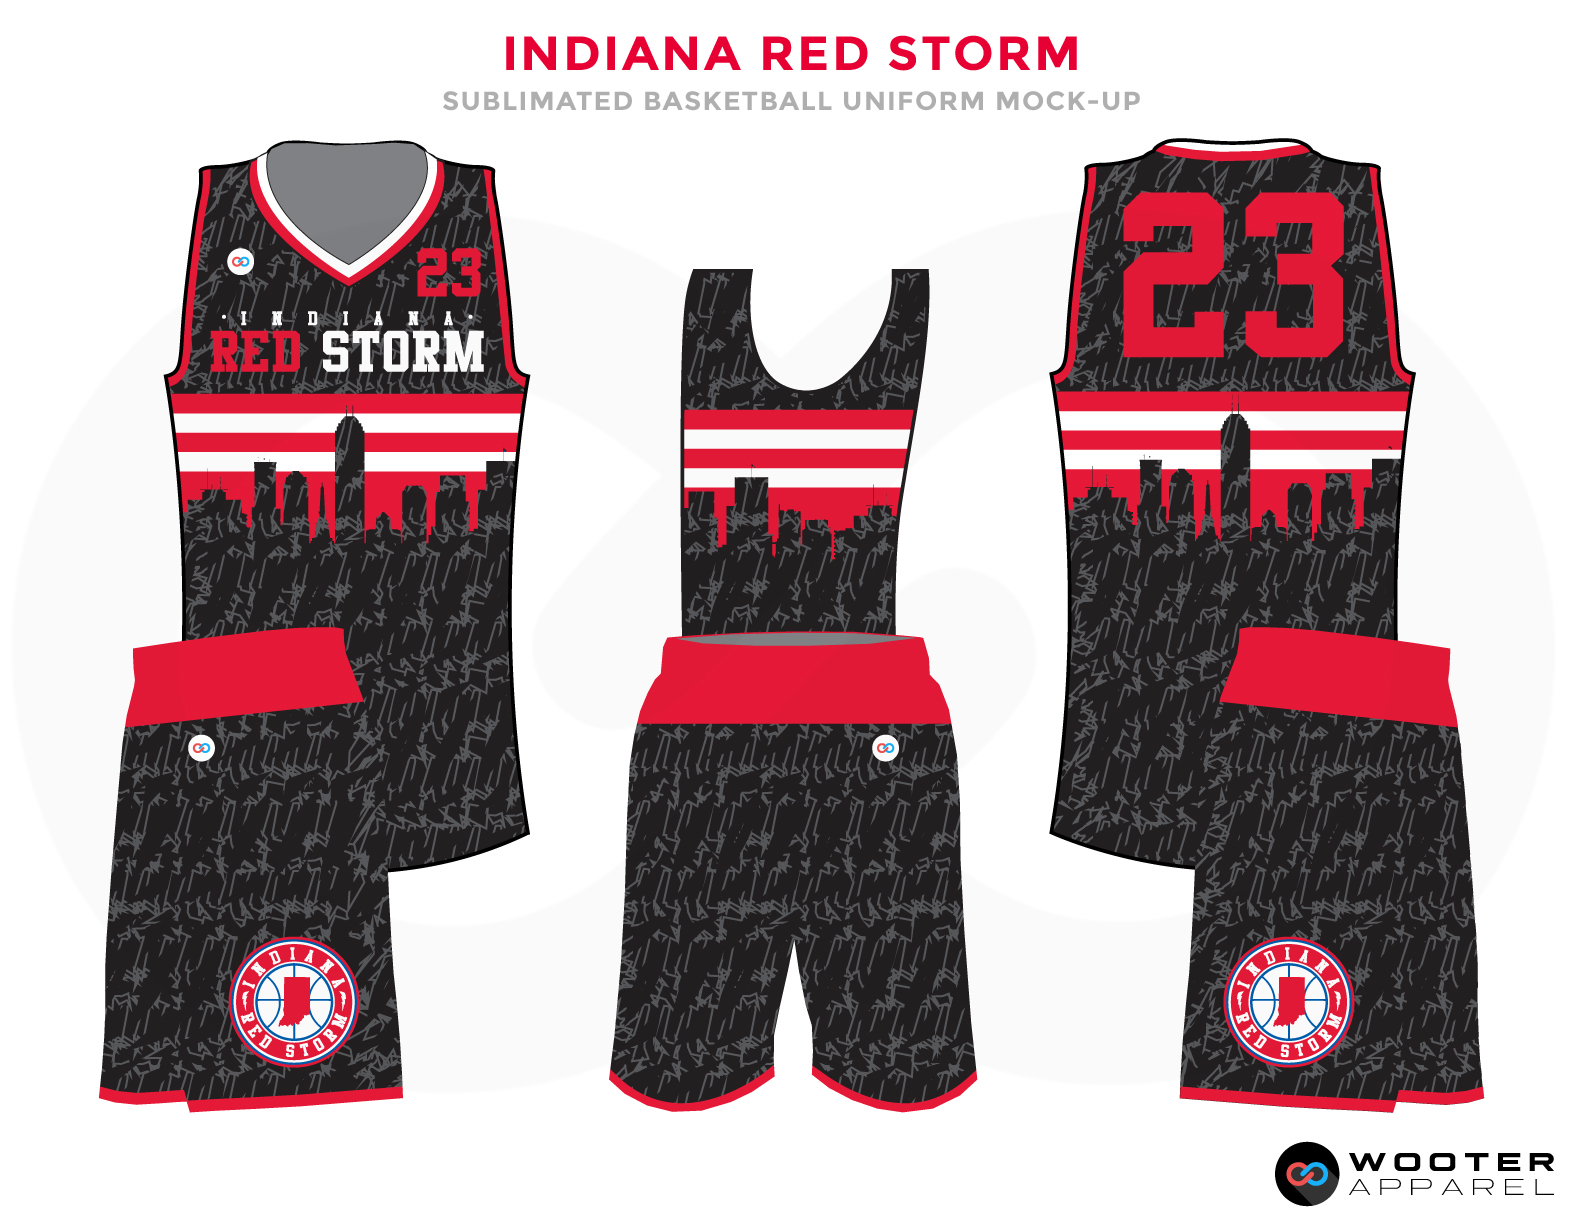 black and red jersey basketball